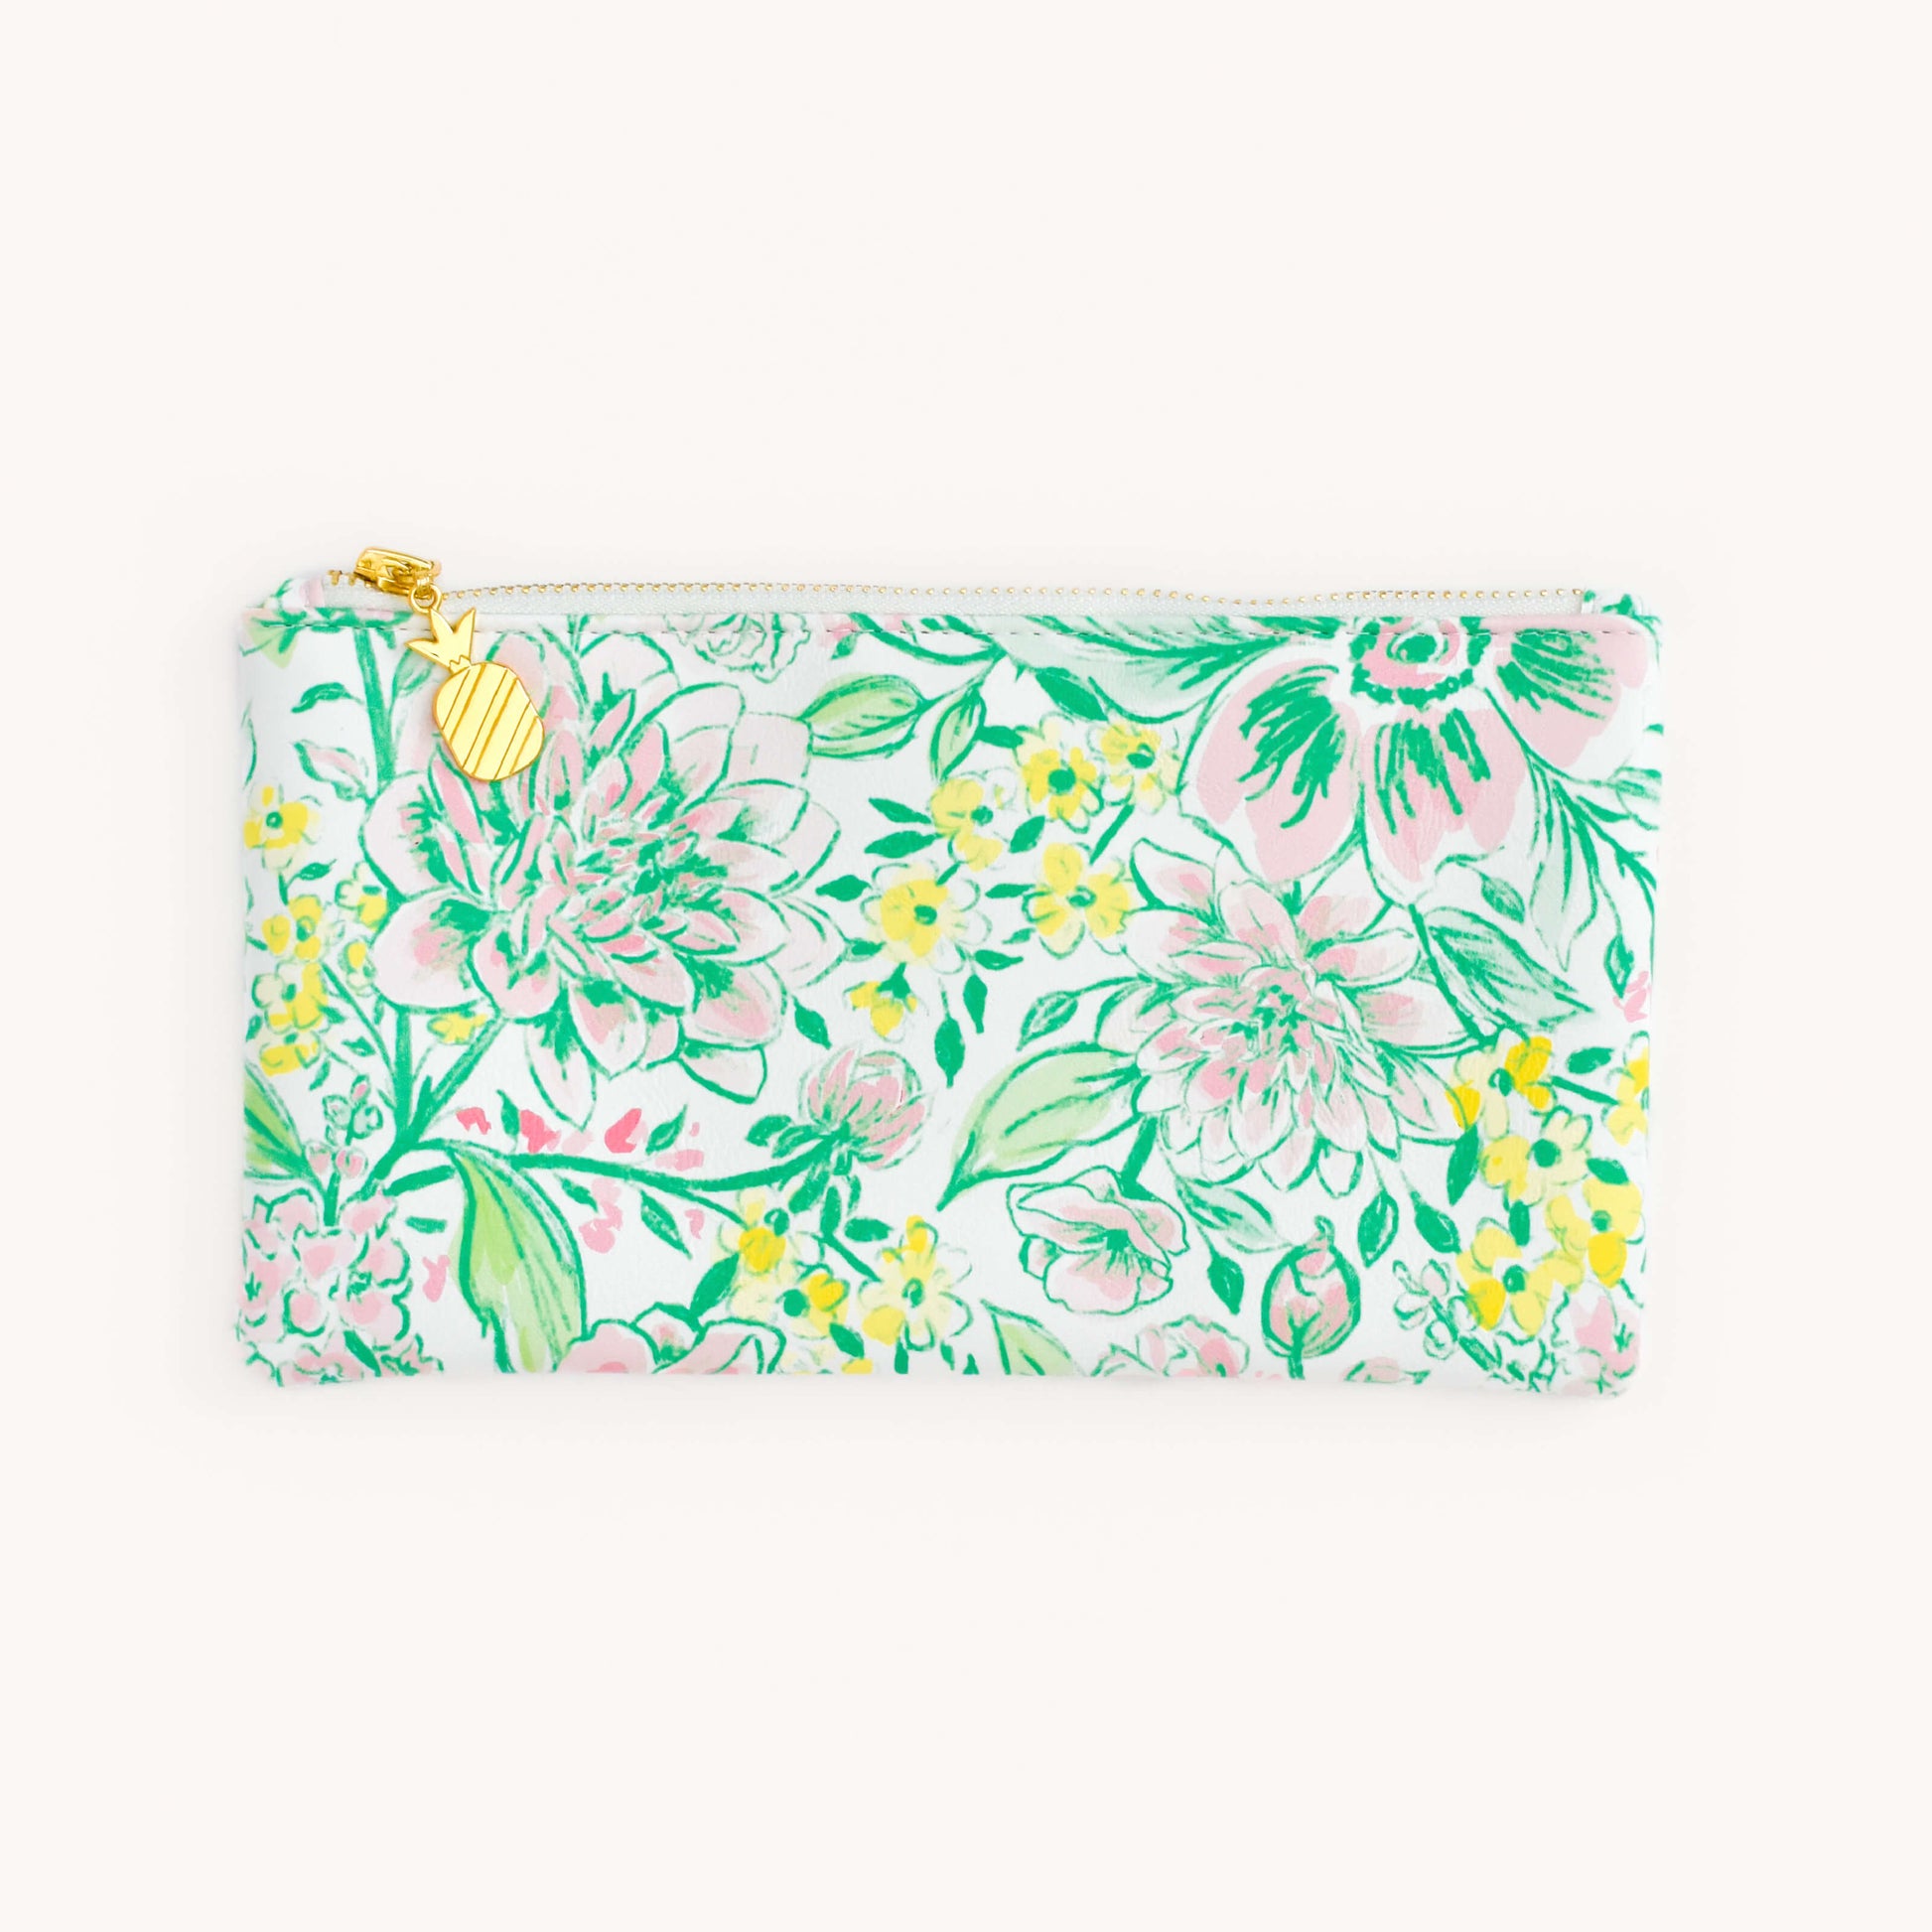 Recycled PET Pencil Pouch – ONYX and Green